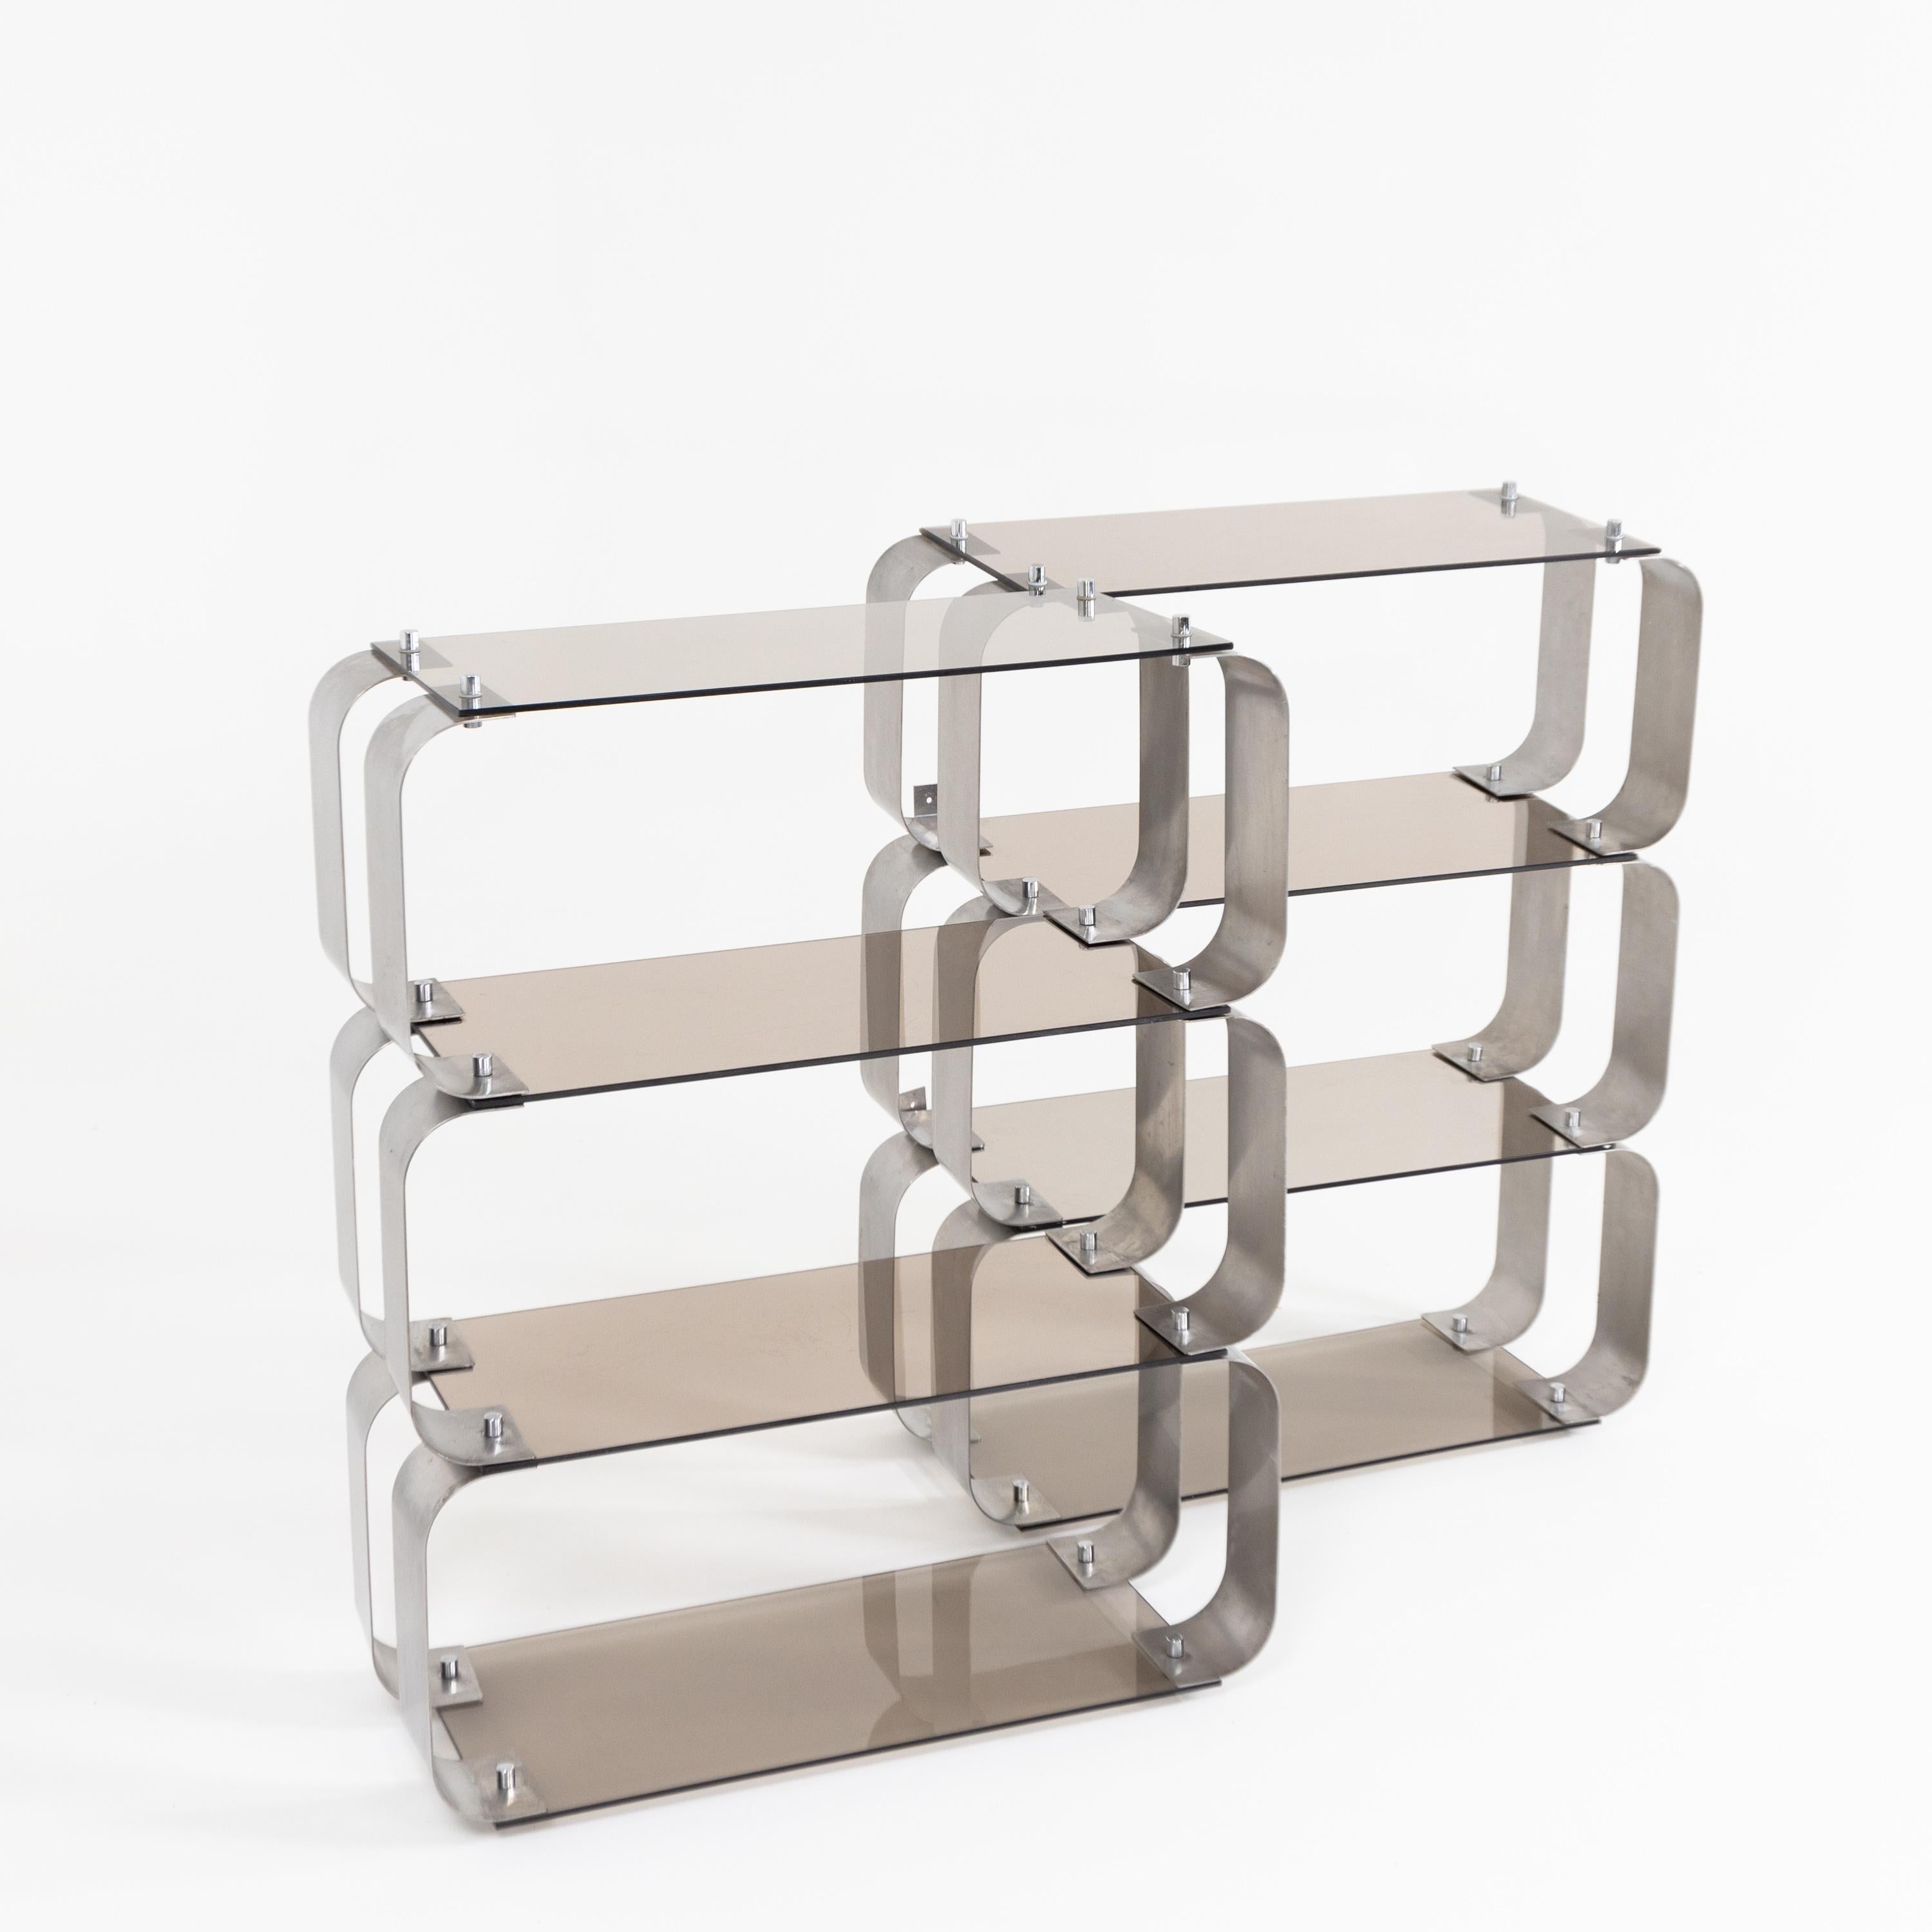 Pair of shelves with c-shaped adjustable steel supports and rectangular smoked glass shelves.